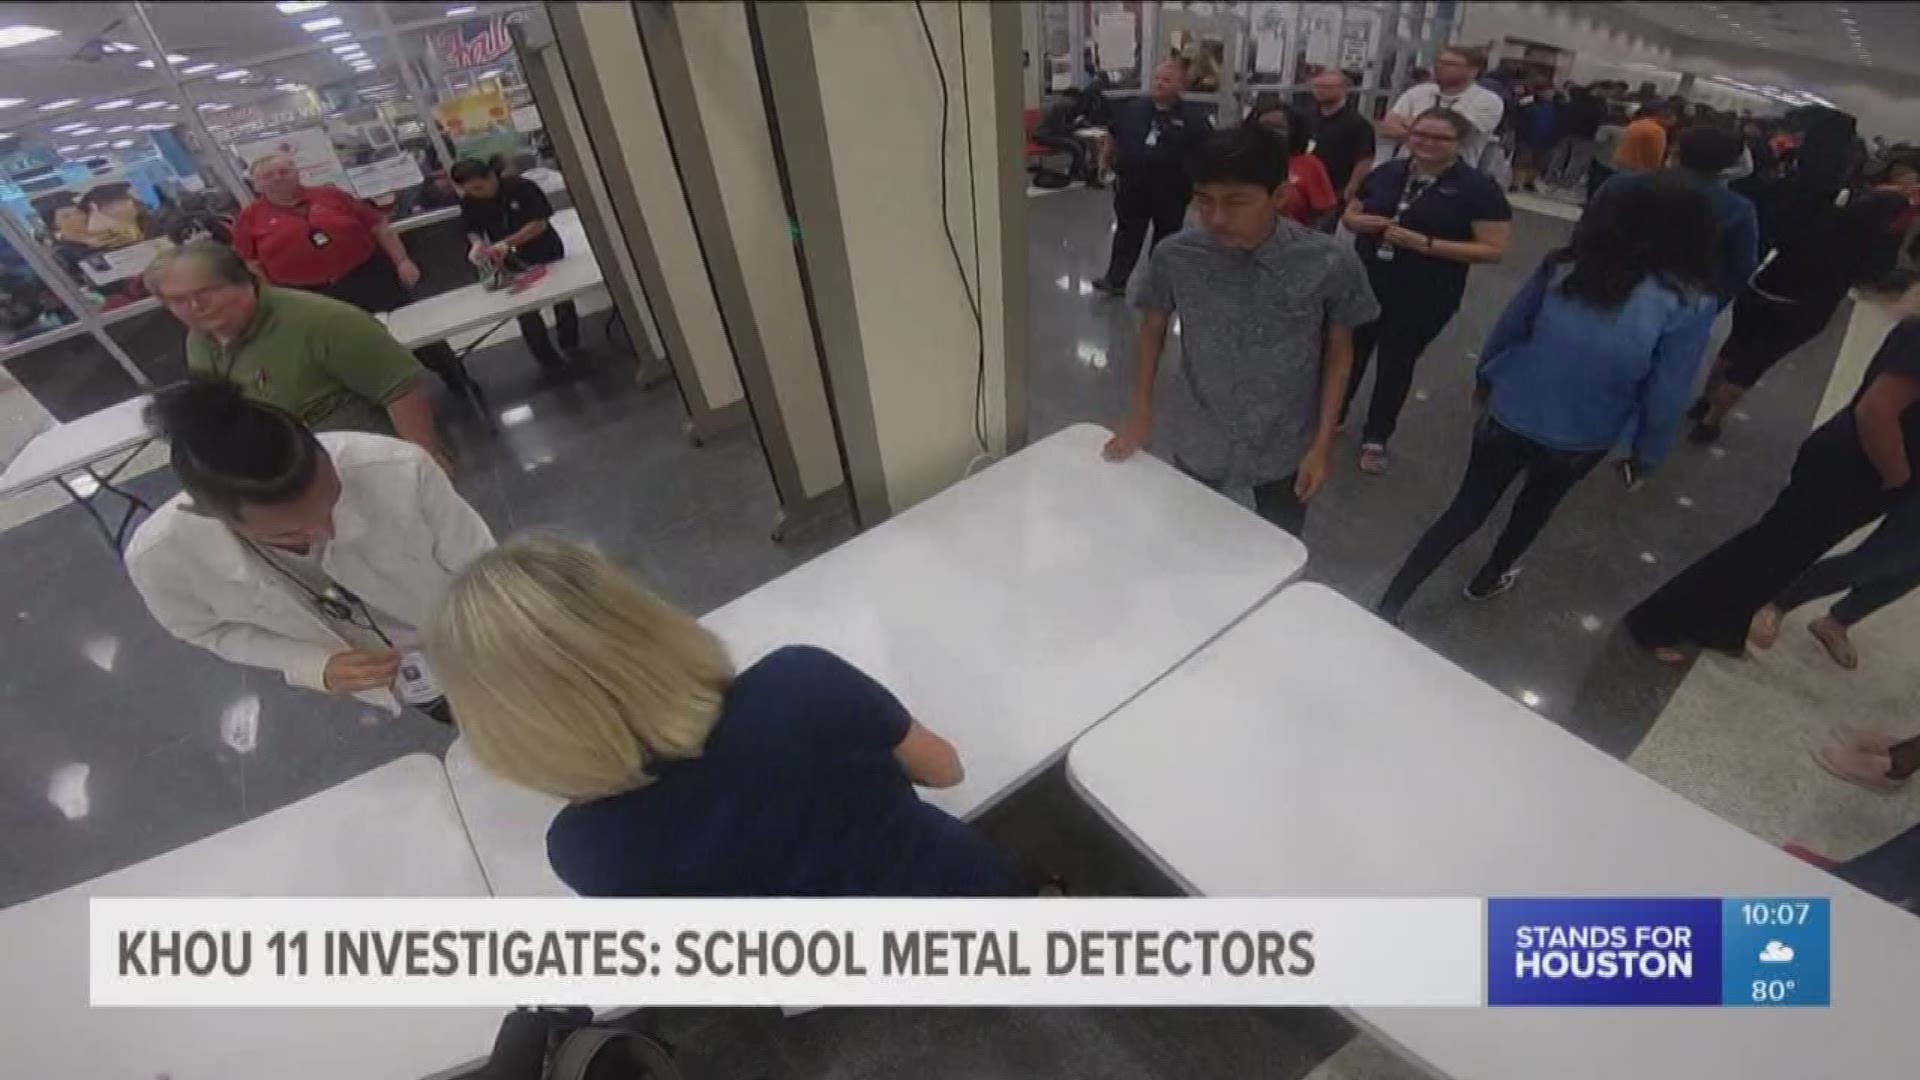 Talks of installing metal detectors in schools have resurfaced after the mass shooting at Santa Fe High School killed 10 people and injured 13 others.